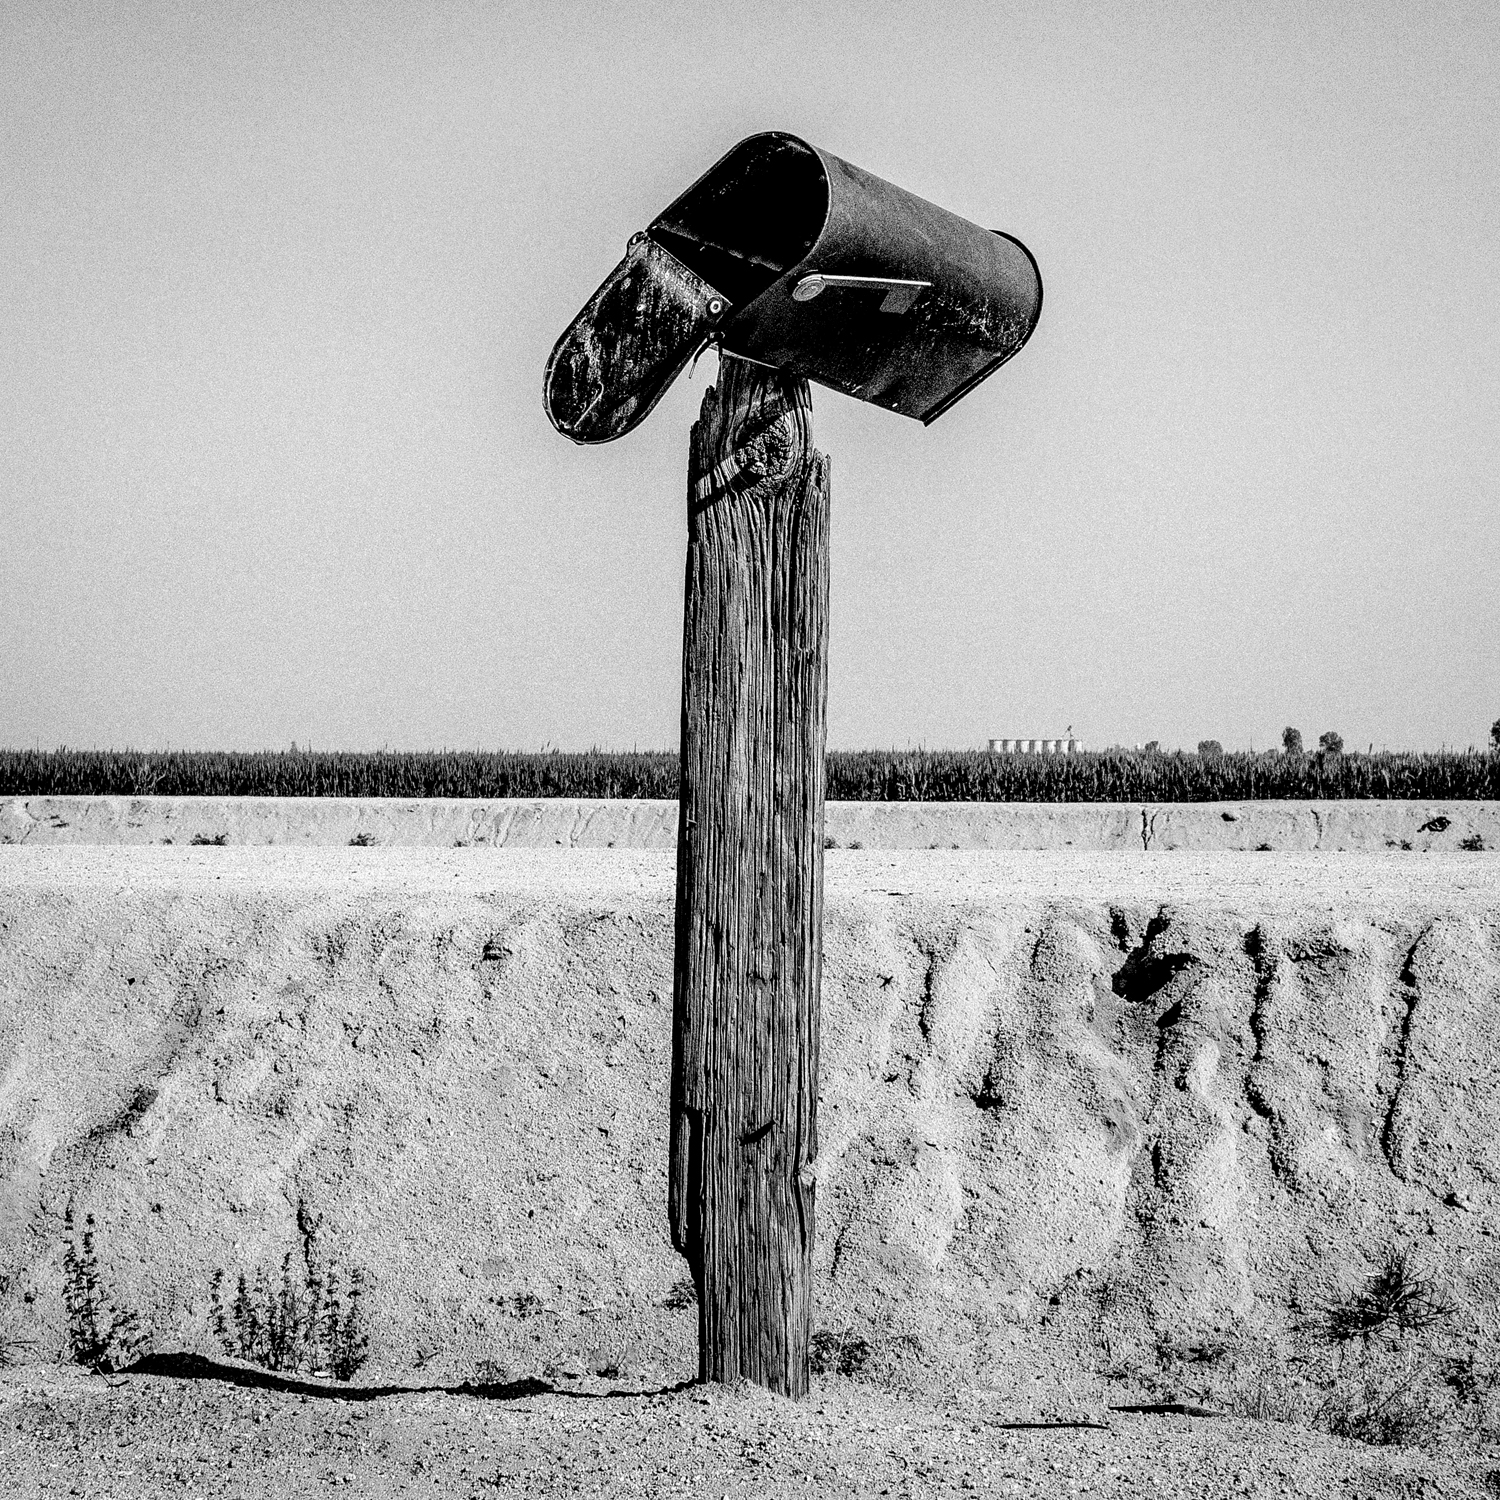 Mailbox. Teviston, CA. 35°55’13”N 119°16’51”W #geographyofpoverty
                              
                              Teviston is an unincorporated community in Tulare County, California, United States. The population was 1,214 at the 2010 census. Residents have a per capita income of $8,891 and 65.6% live below the poverty level. Teviston is also known as “Freemanville,” a name given to it in the 1930s by Rev. J.F. Freeman, an Oklahoma labor contractor.
                              
                              www.geographyofpoverty.com